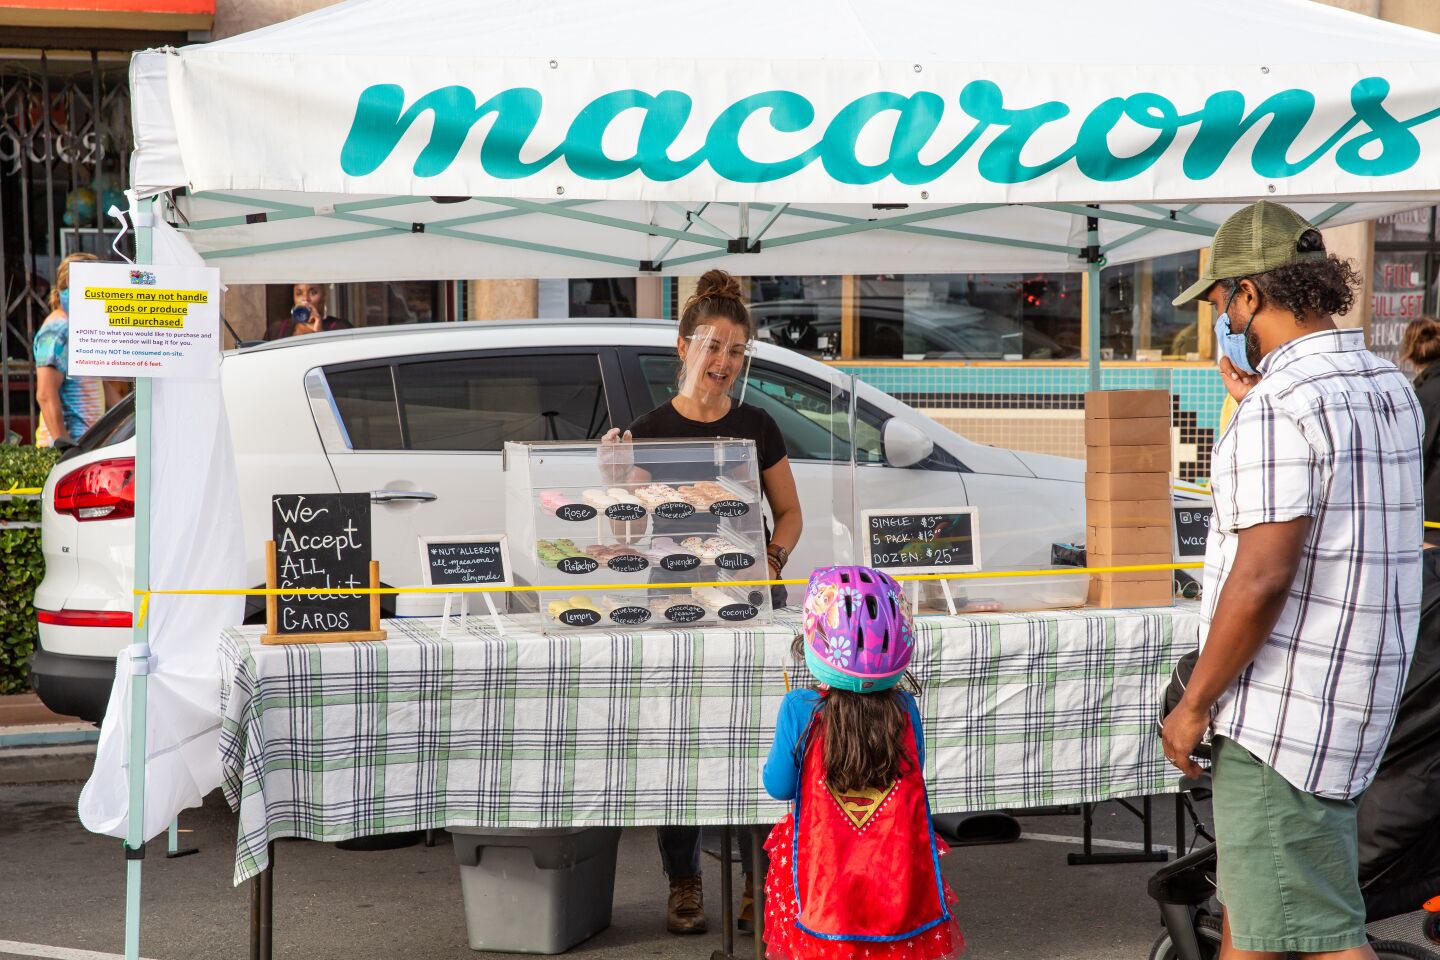 Montague Williams and his daughter check out the macarons at Gigi’s Gluten Free, owned by Lacee Perkins, at the Ocean Beach Farmers Market.